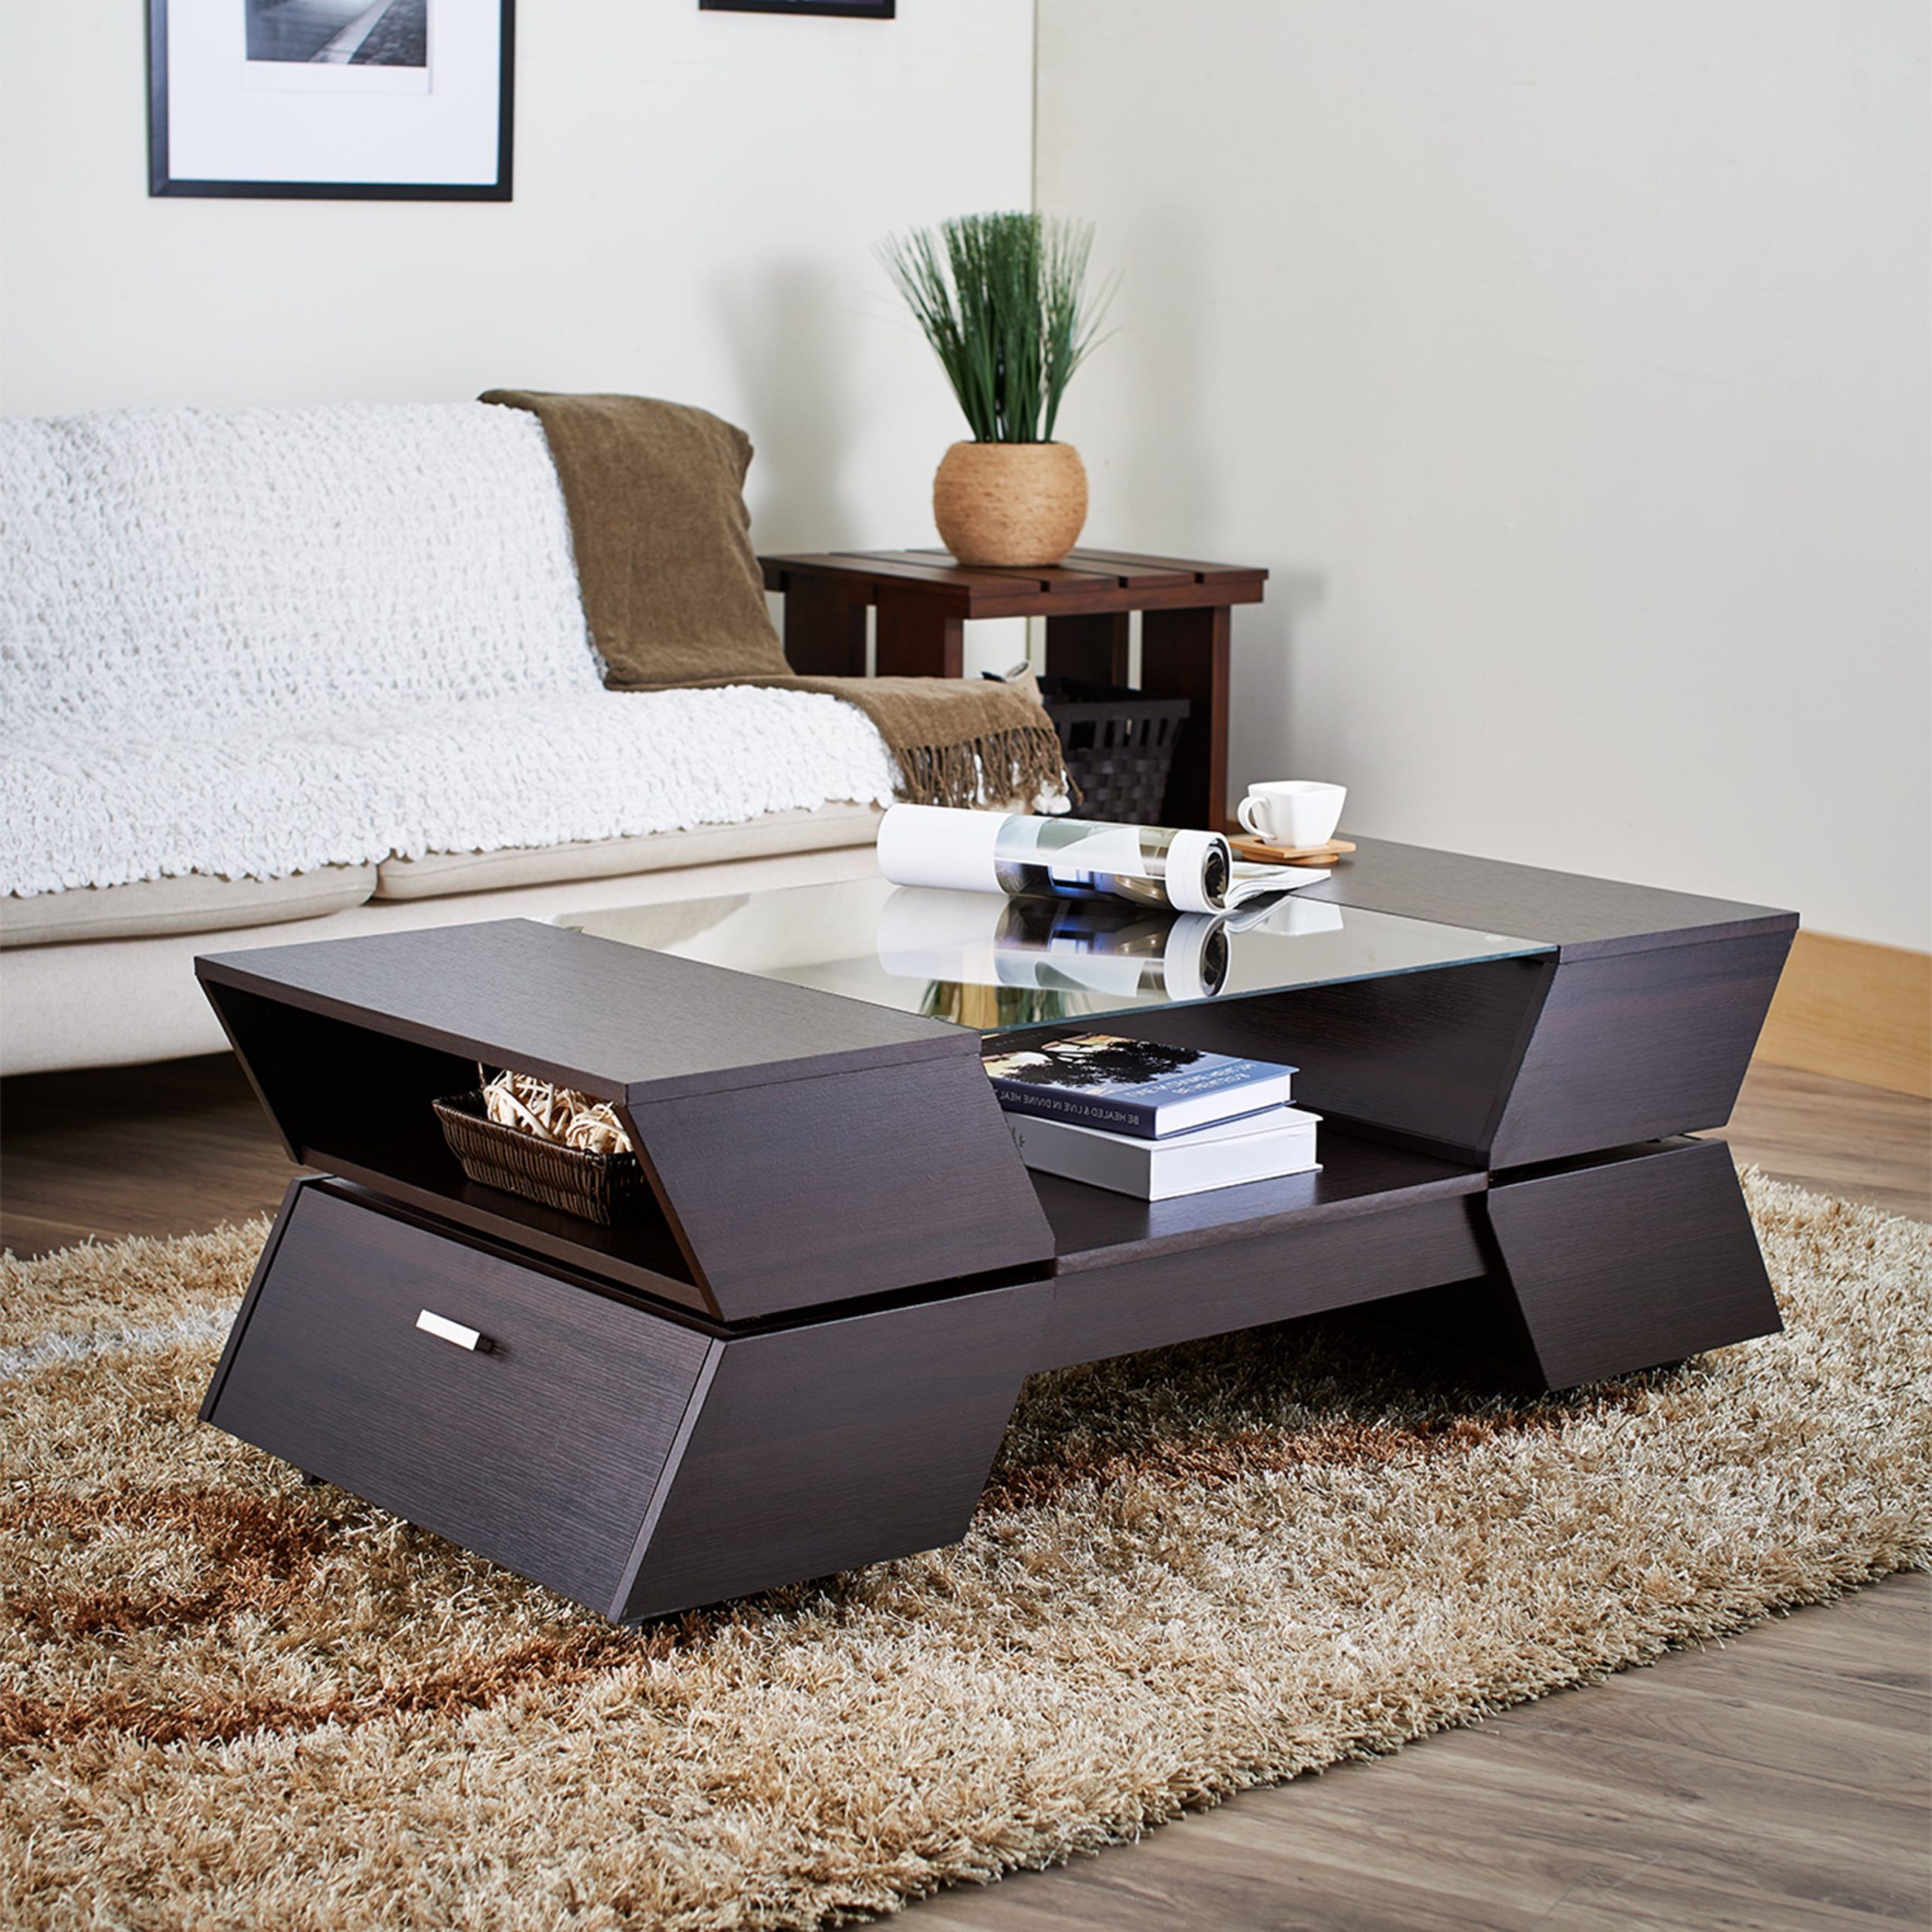 Widely Used Espresso Coffee Table With Glass Top : Elke Rectangular Glass Coffee Throughout Glass Top Coffee Tables (View 11 of 15)